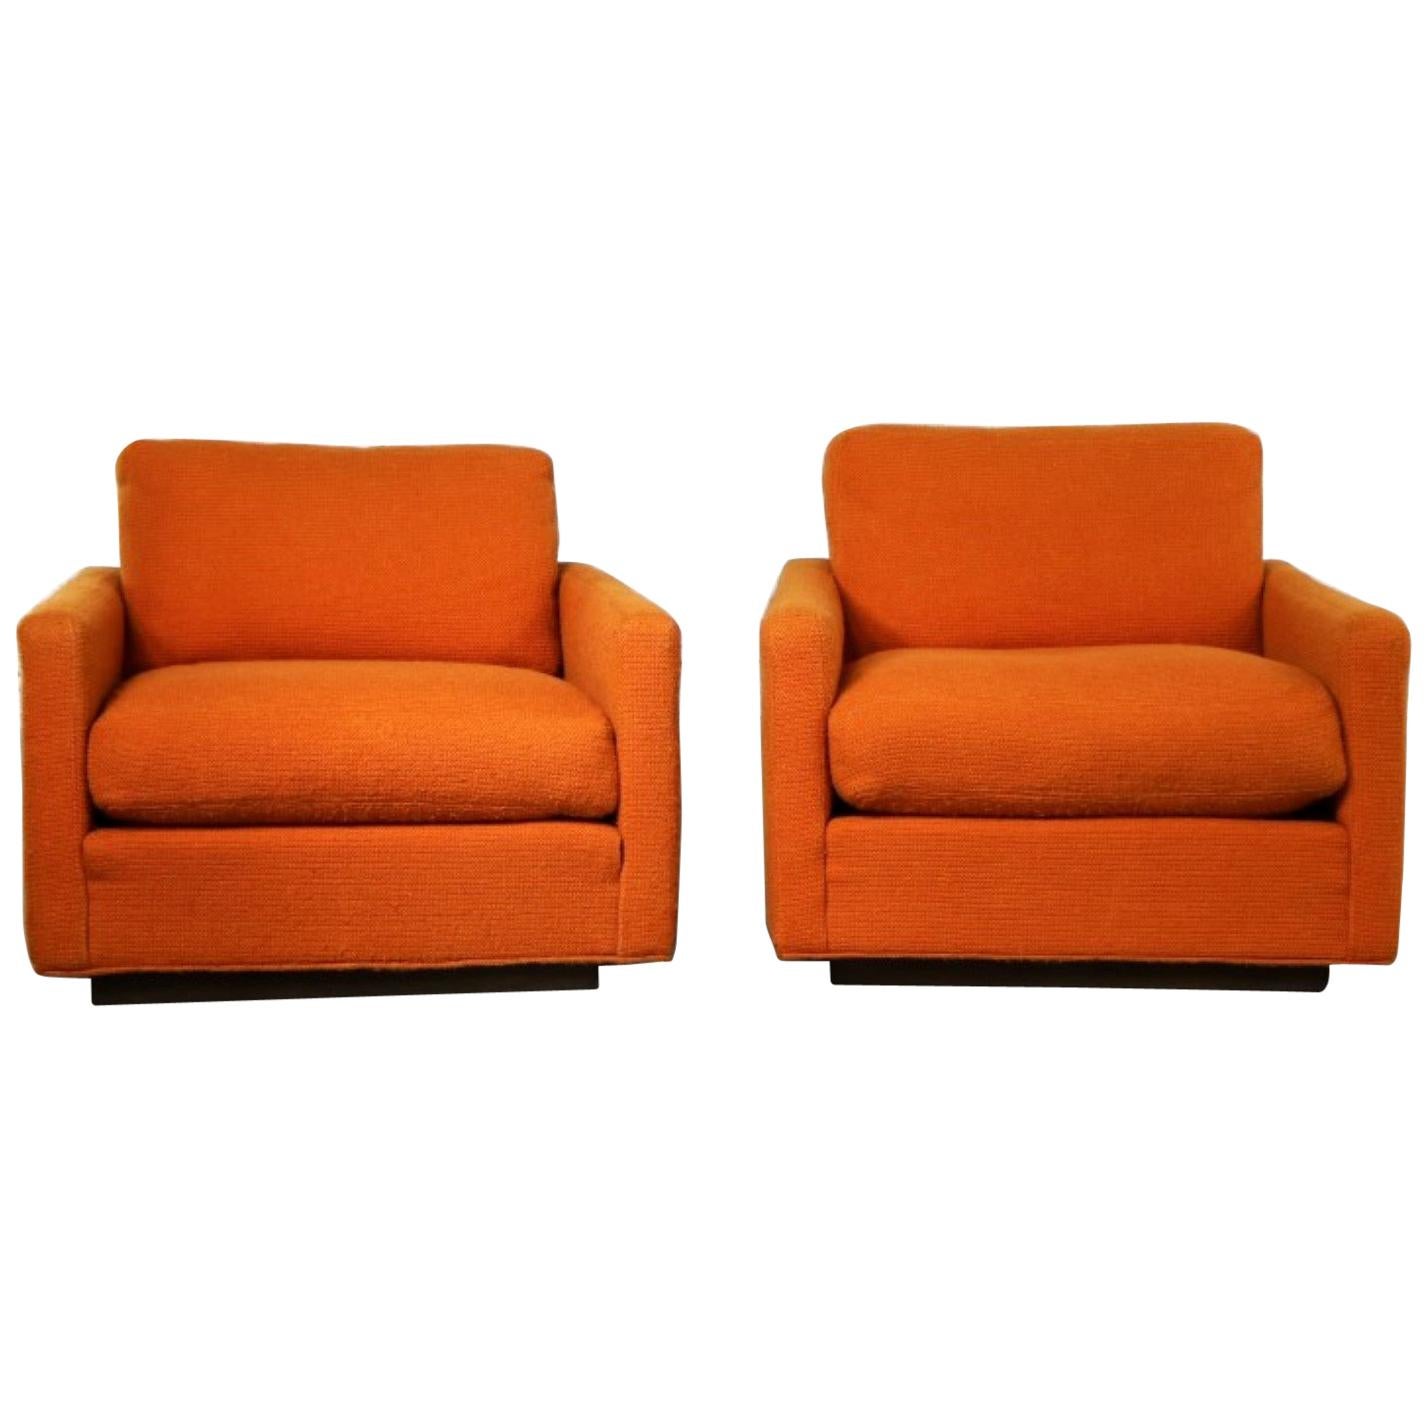 Thayer Coggin Cube Lounge Chairs Orange Lawson Style Attributed to Milo Baughman